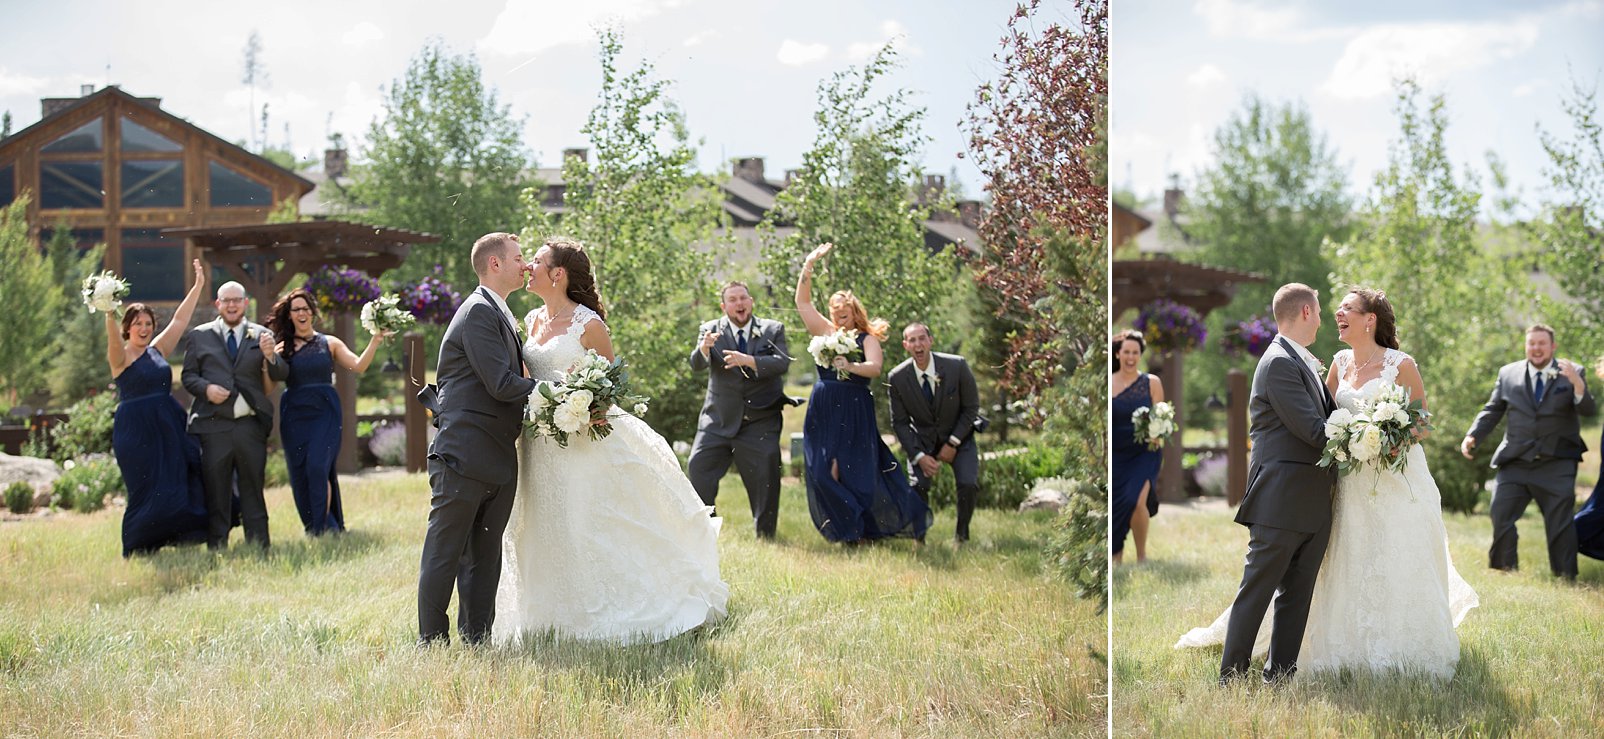 wind blowing during bridal party photos